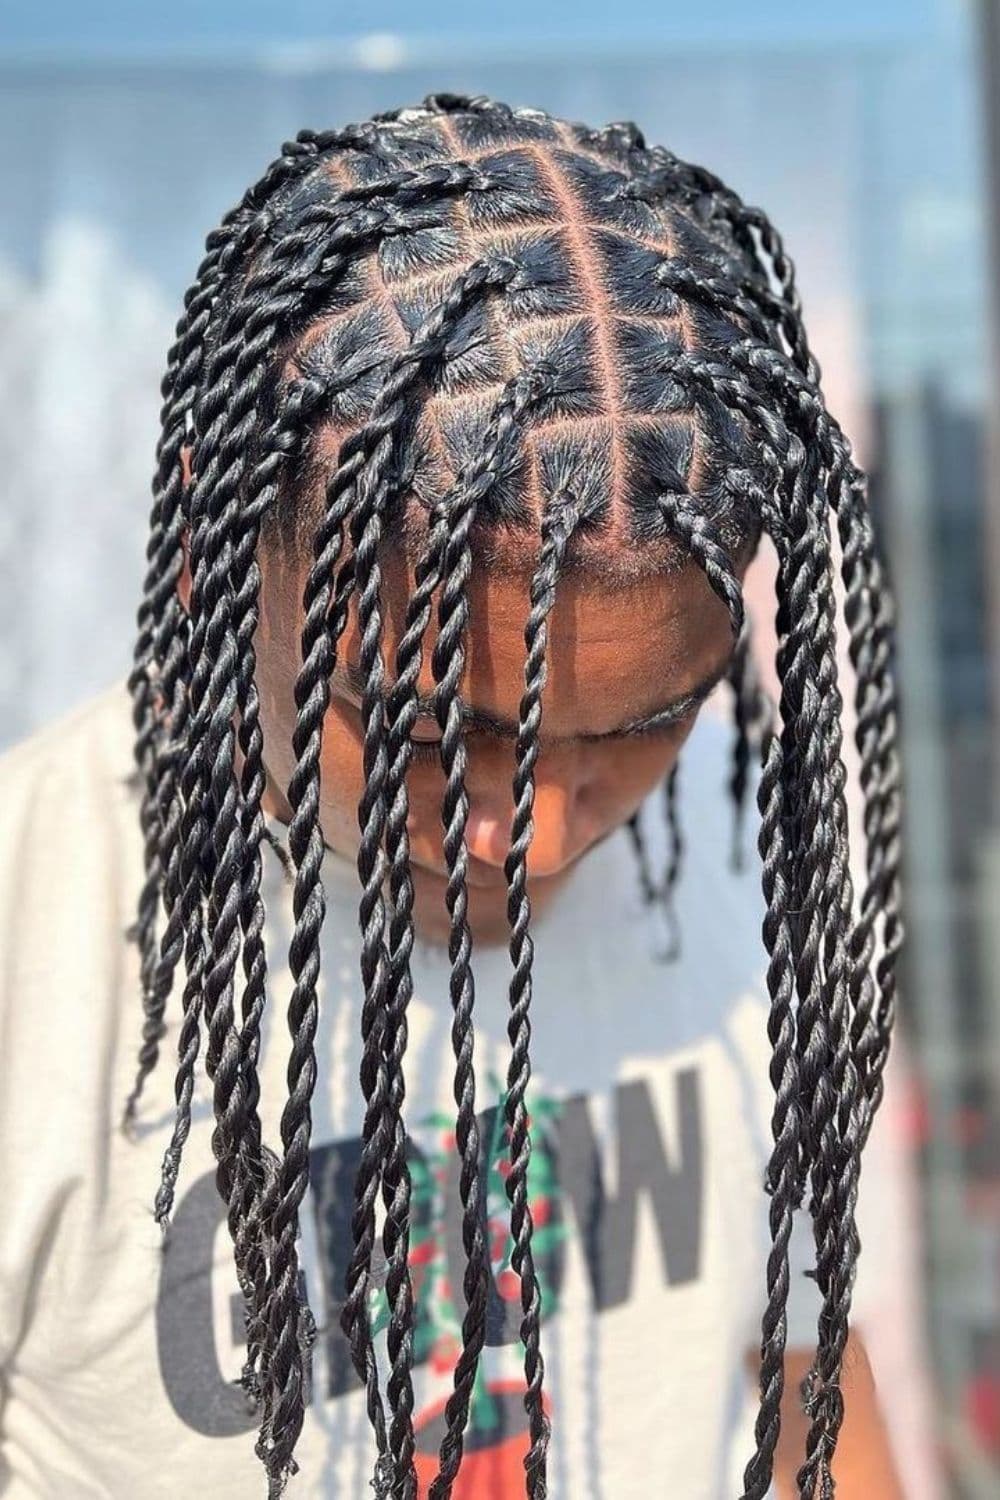 A man with long twists.